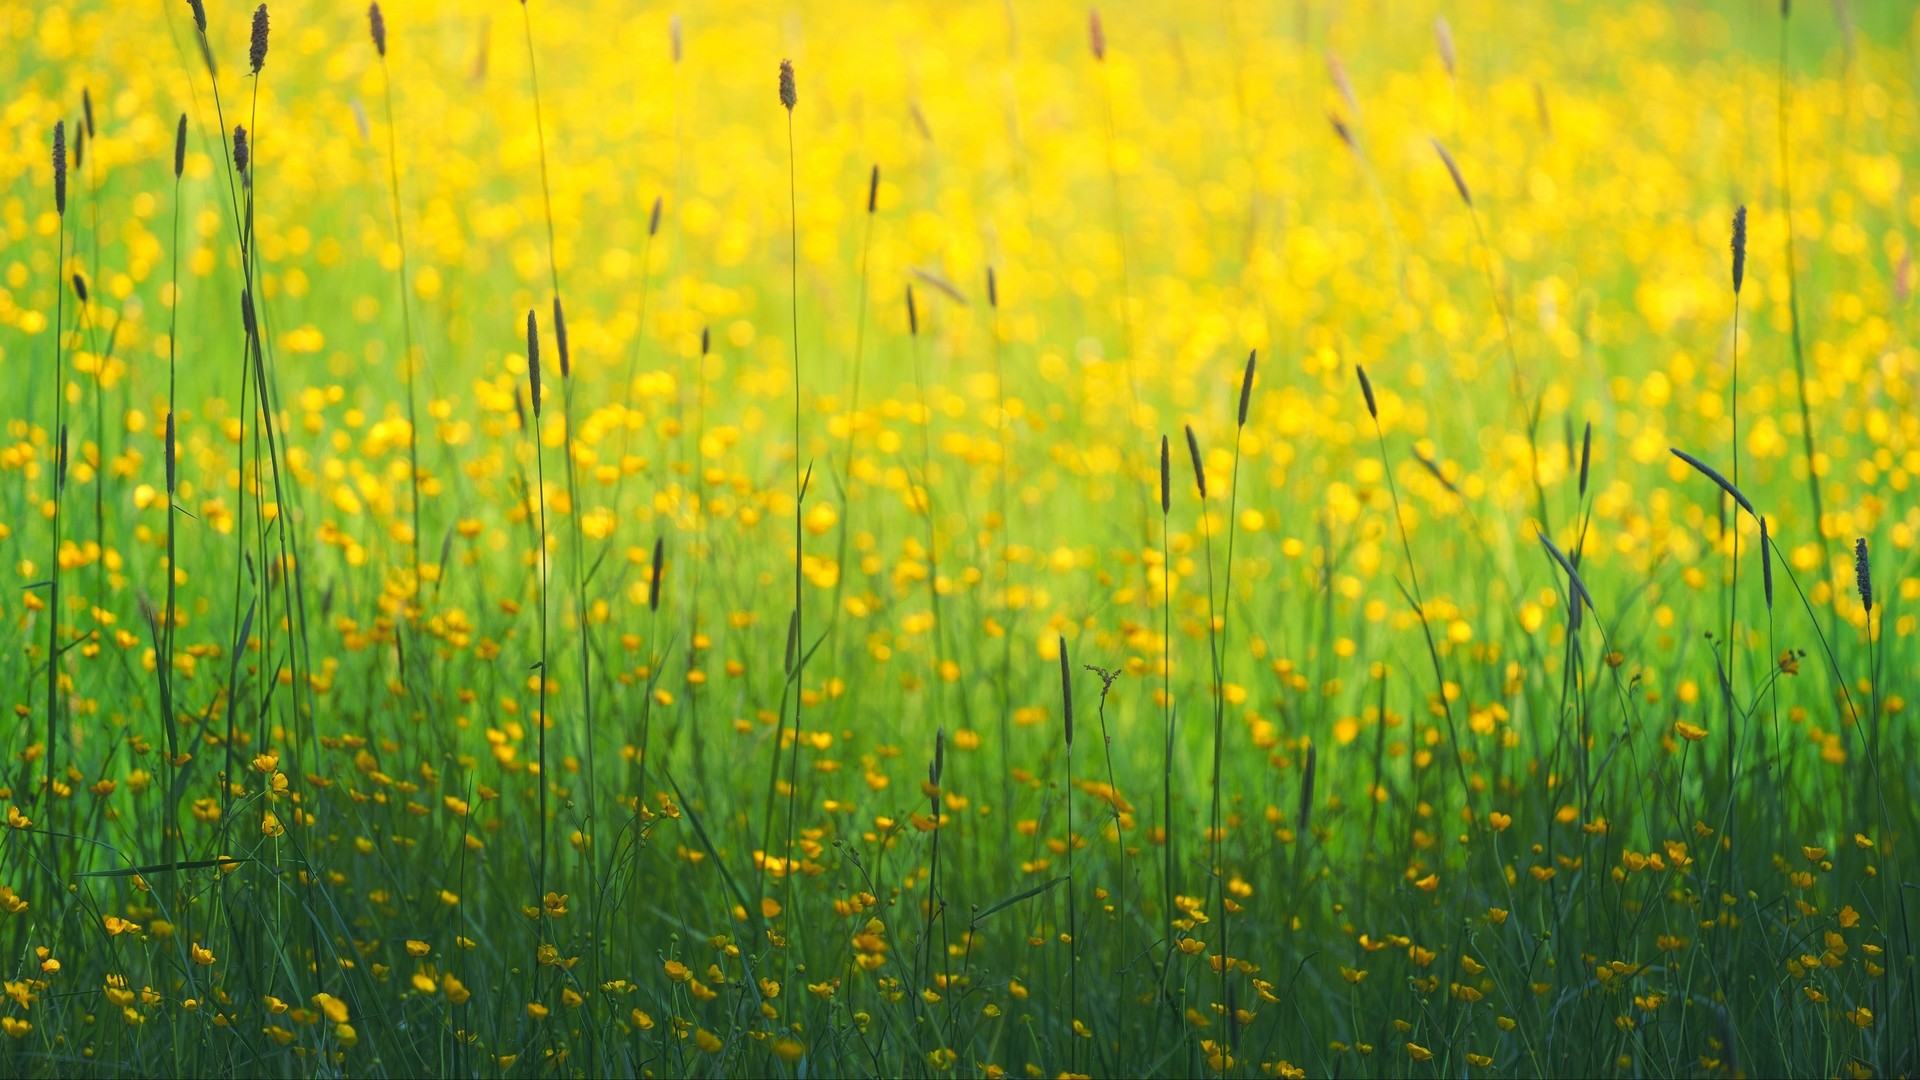 1920x1080 wallpapers: flowers, field, yellow, grass (image)